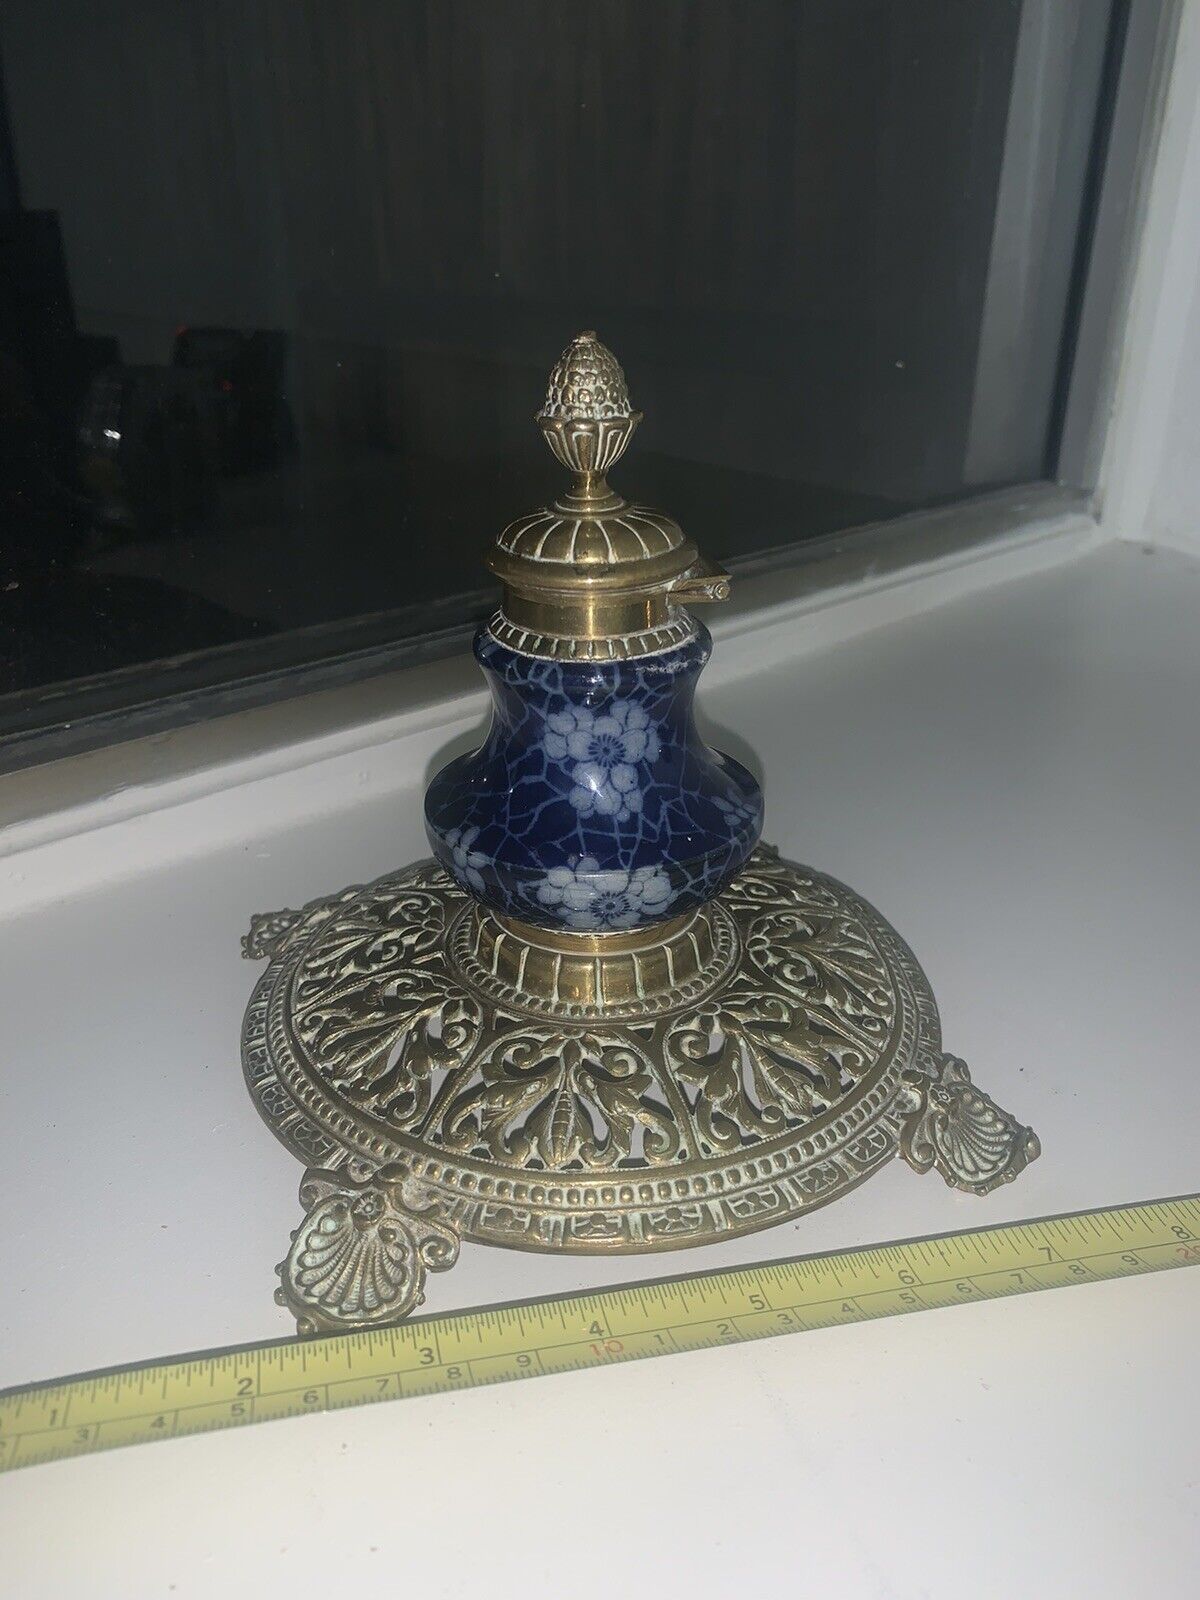 1870s flow blue china & ormolu repousse & pierced inkwell & stand James Cartland